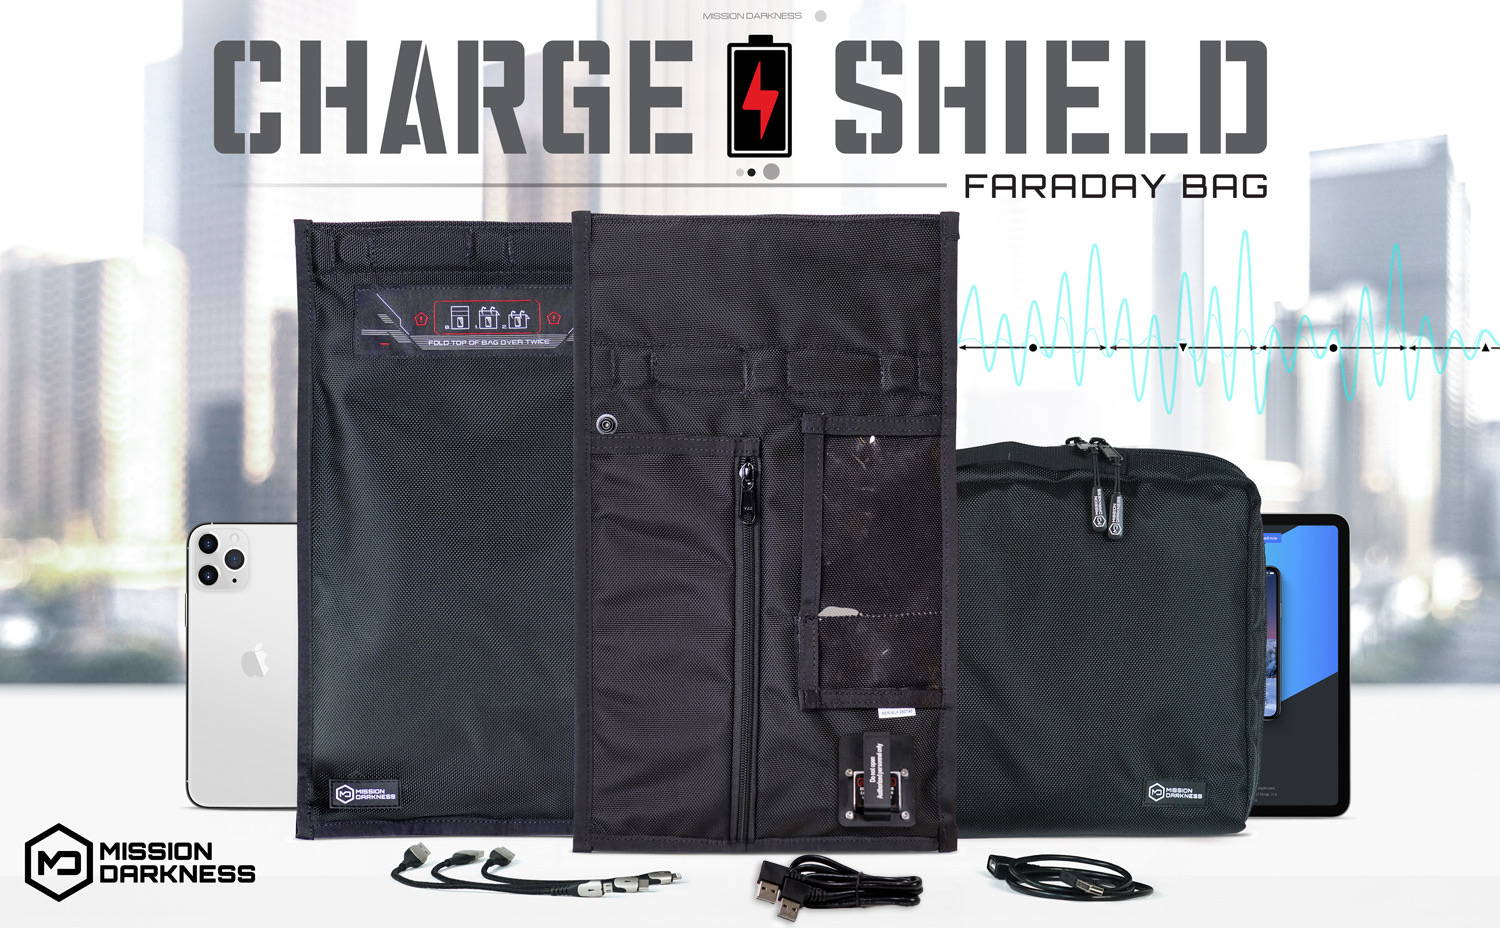 Mission Darkness Non-window Charge & Shield Faraday Bag offers RF shielded mobile device connectivity